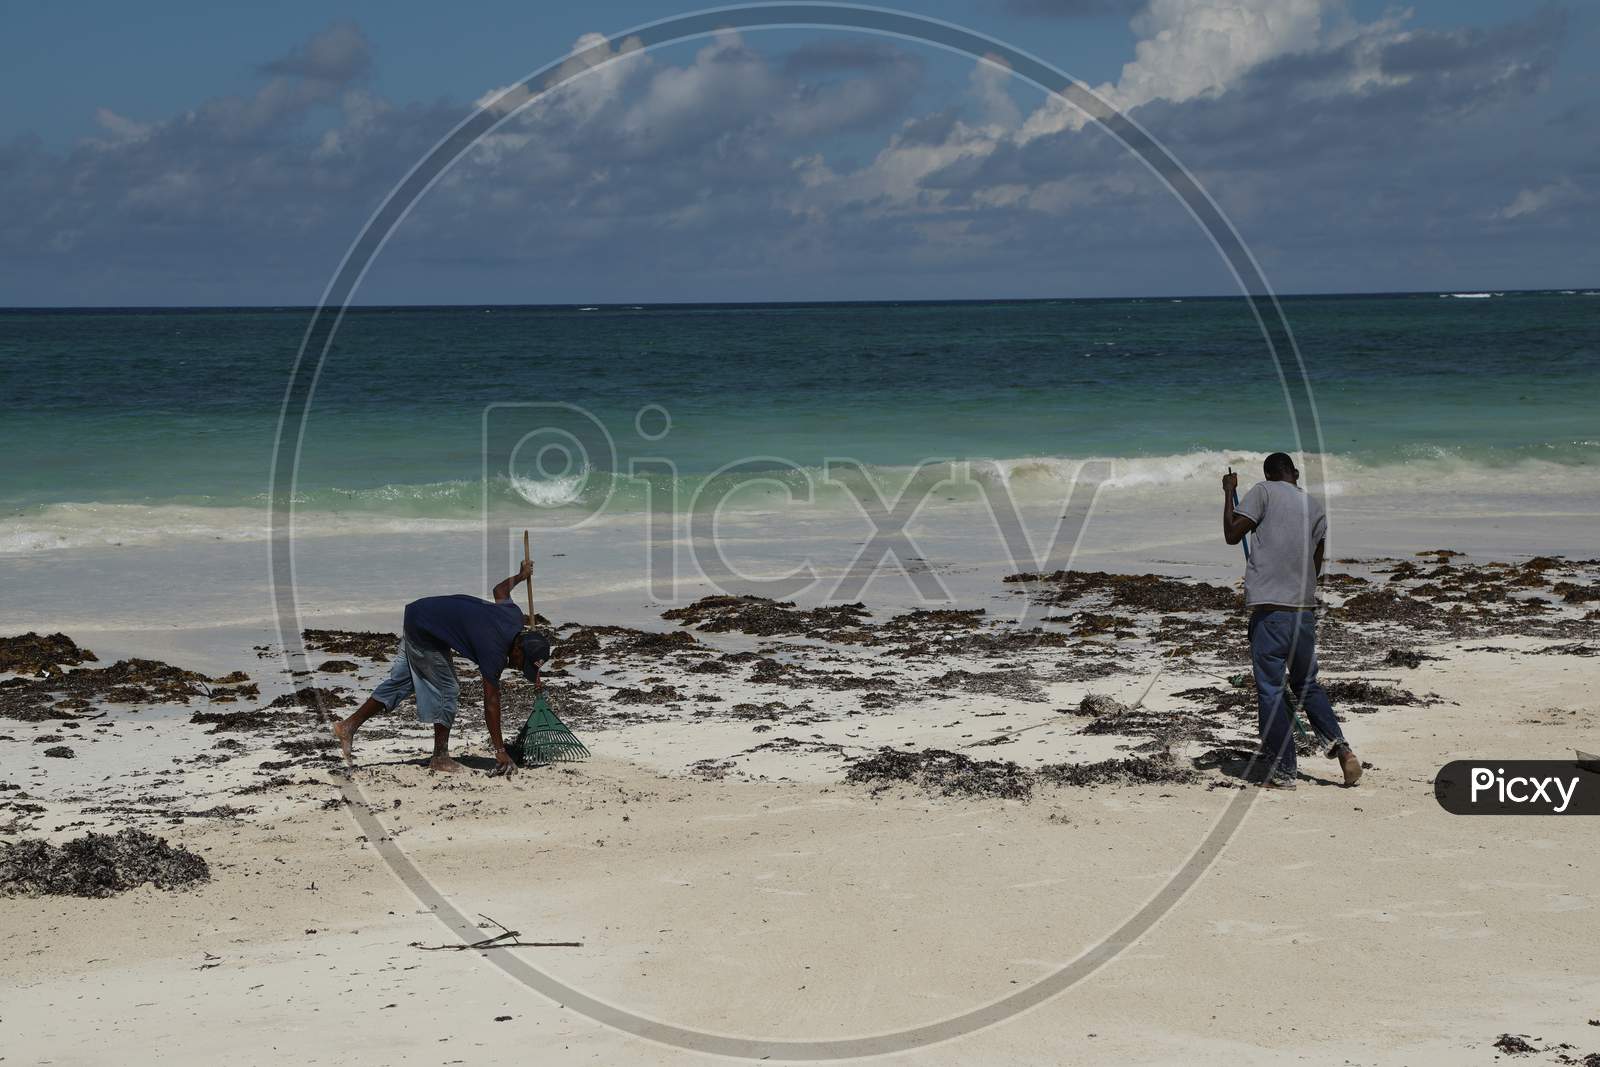 Shore cleaners in Kenya by the beach